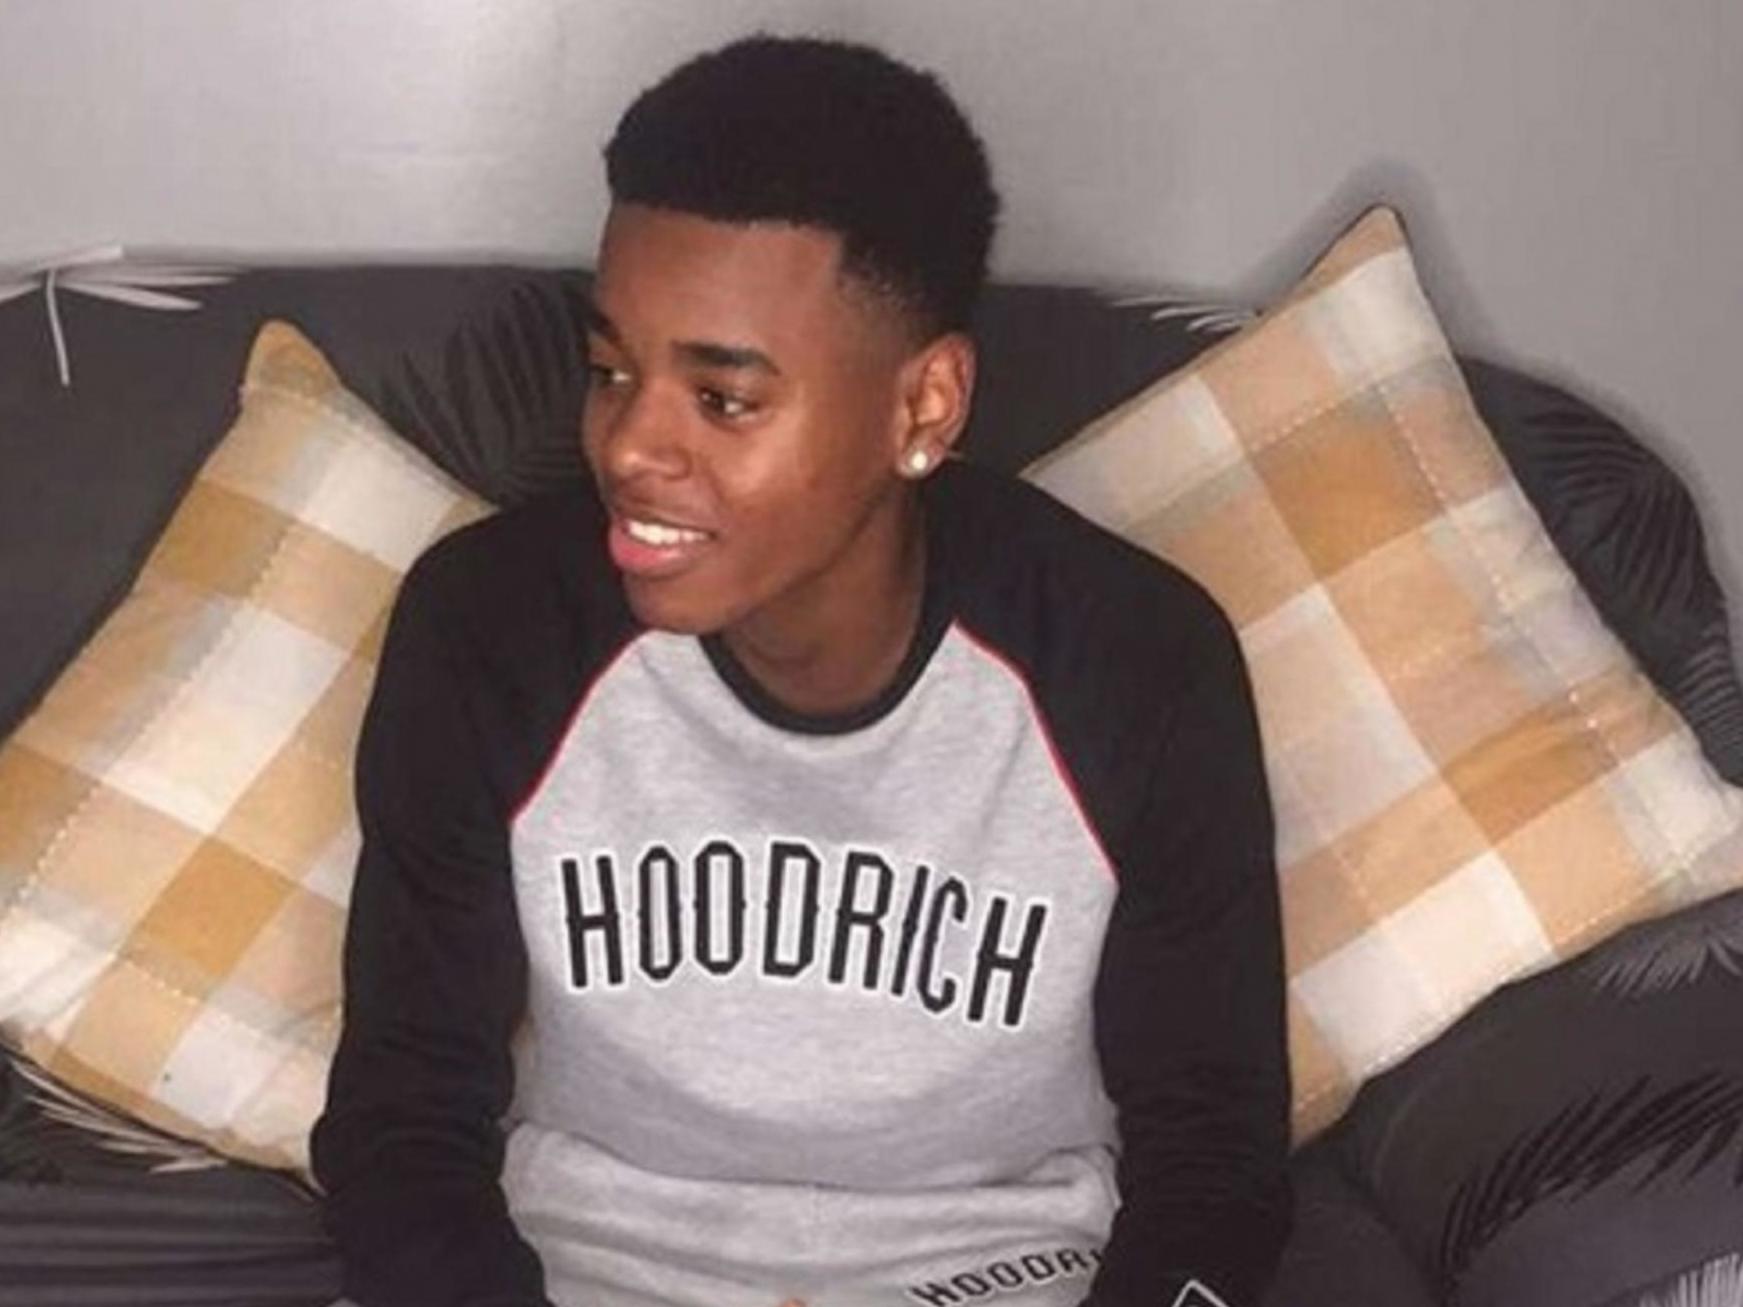 Ramani Morgan, 16, from Birmingham, who was stabbed to death after a row broke out at a house party in Coventry on 29 February 2020. Two 17-year-old boys have been arrested on suspicion of murder.